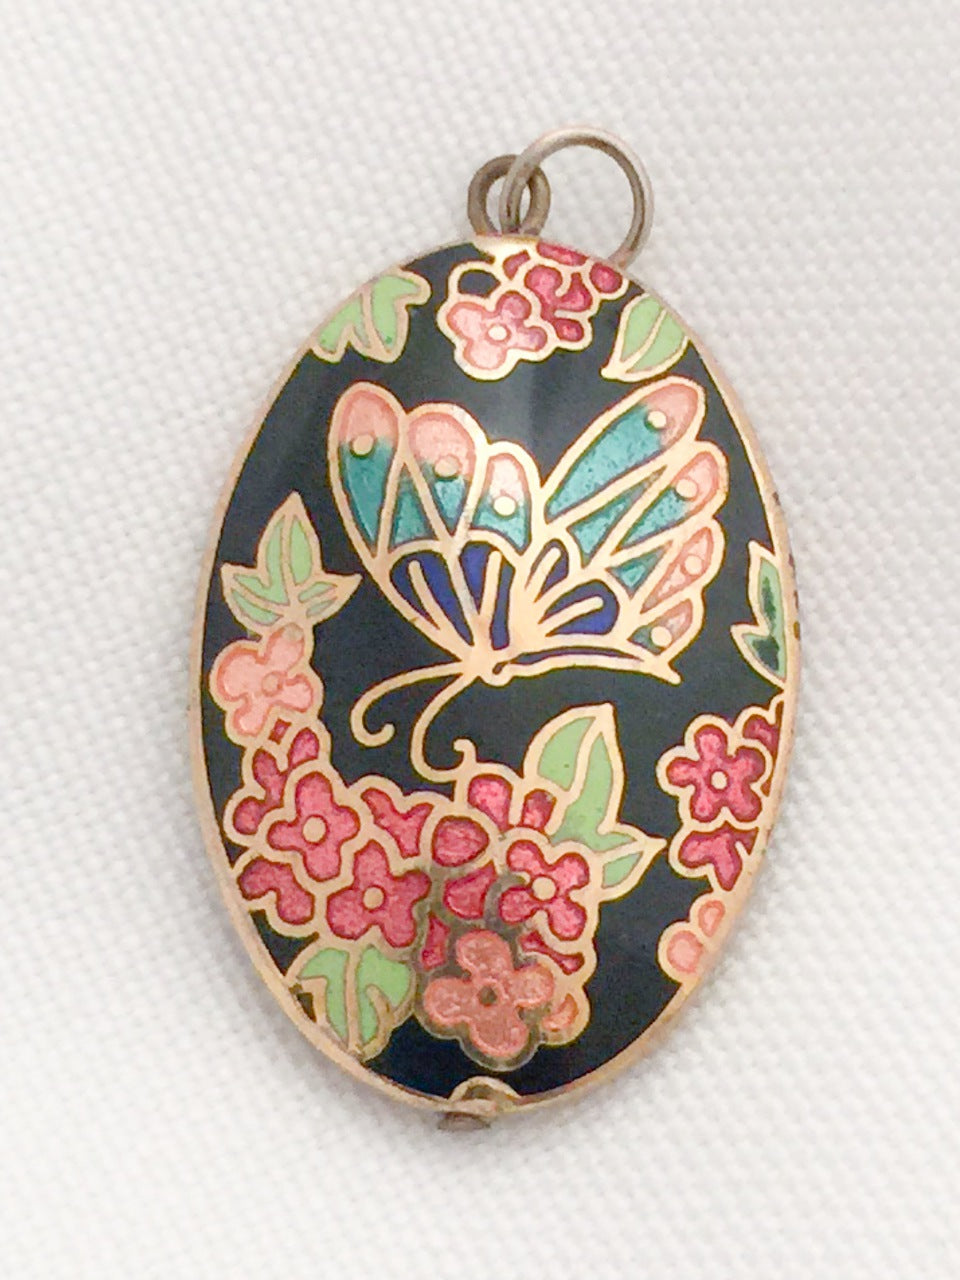 Butterfly Flowers Cloisonne Pendant  Vintage Double Sided